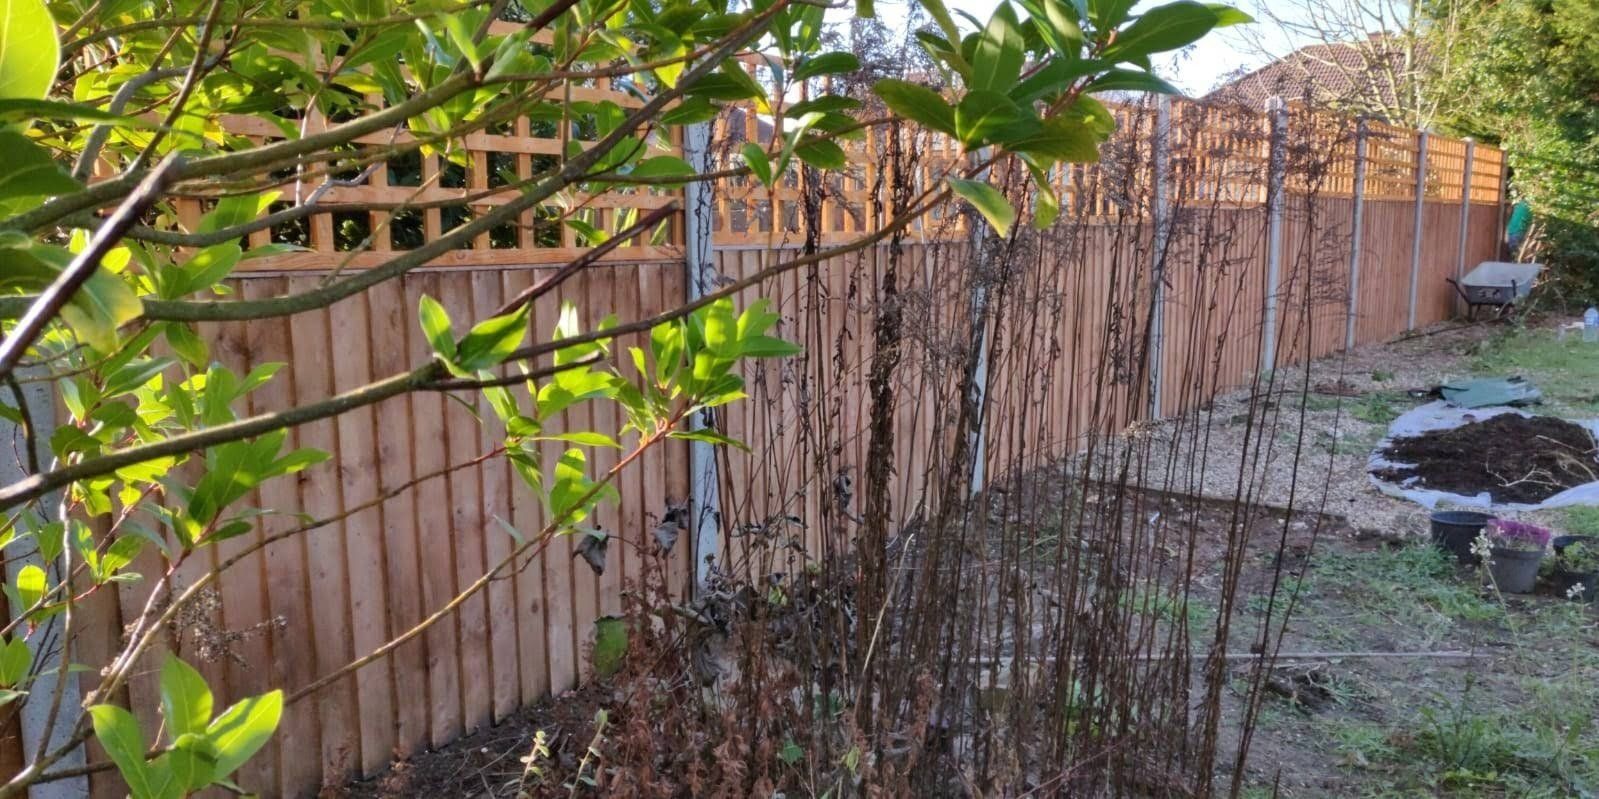 New replacement for old fence with concrete posts and topped with trellis.